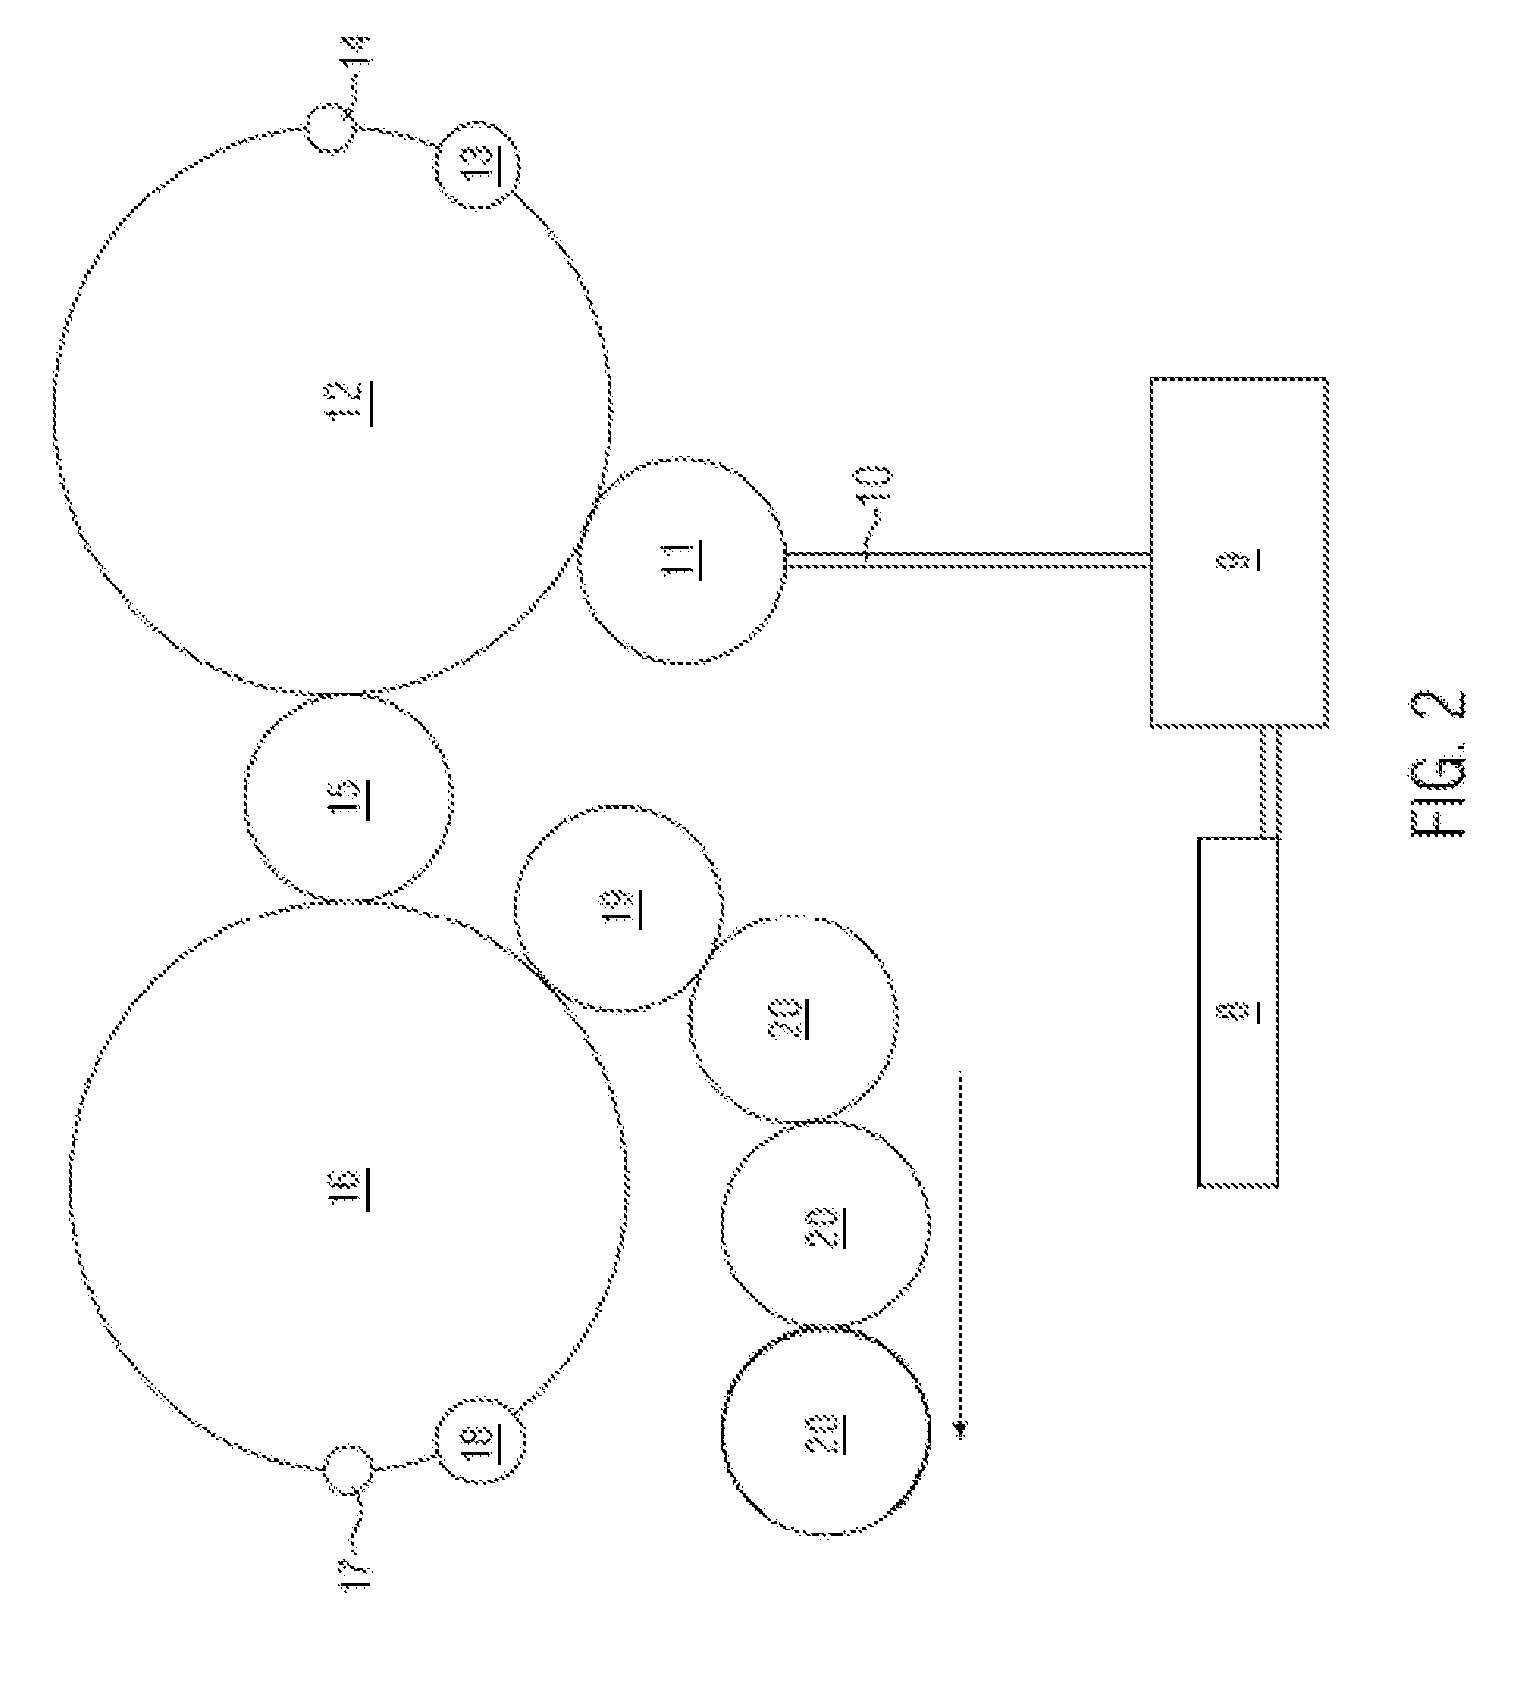 Method of treating at least one container in a container treatment plant